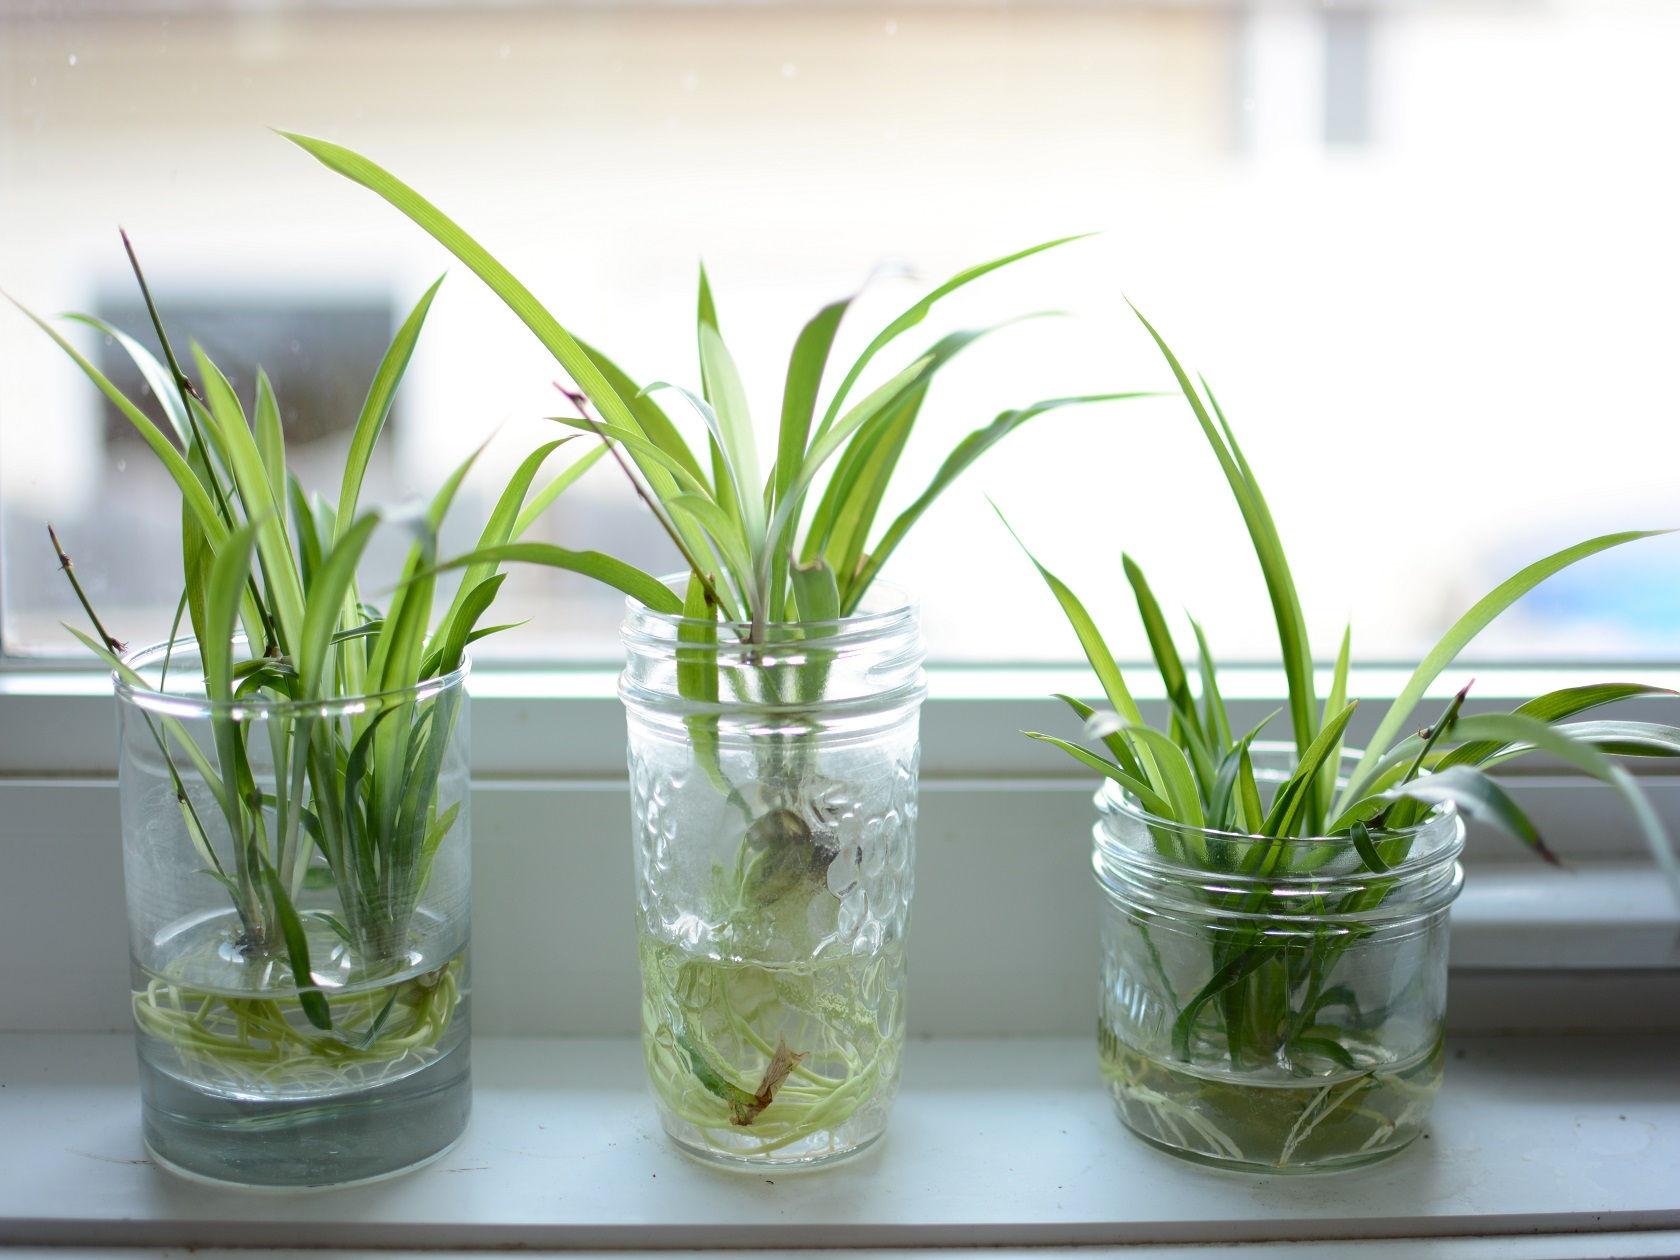 Spider Plant Water Cultivation: Can You Grow Spider Plants In Water